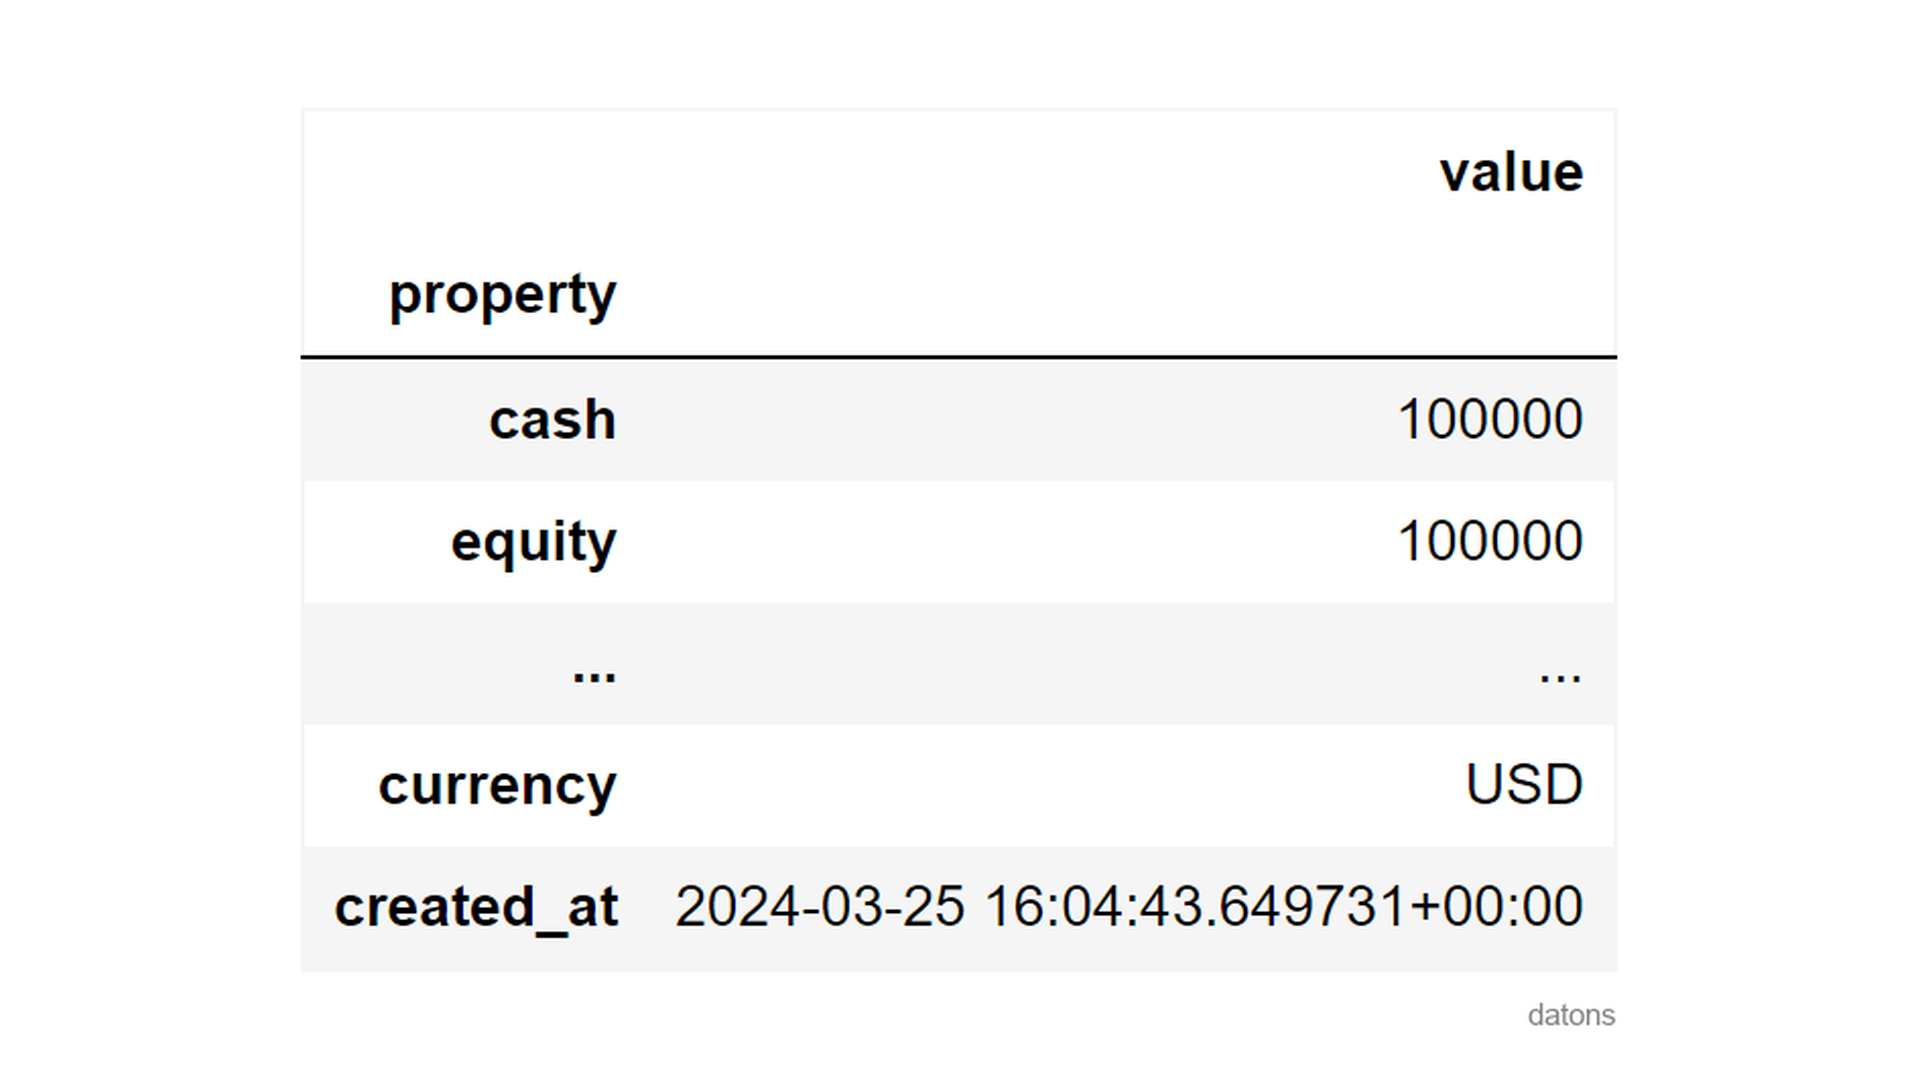 View of the initial balance of a demo account in Alpaca, showing a balance of 100,000 dollars.